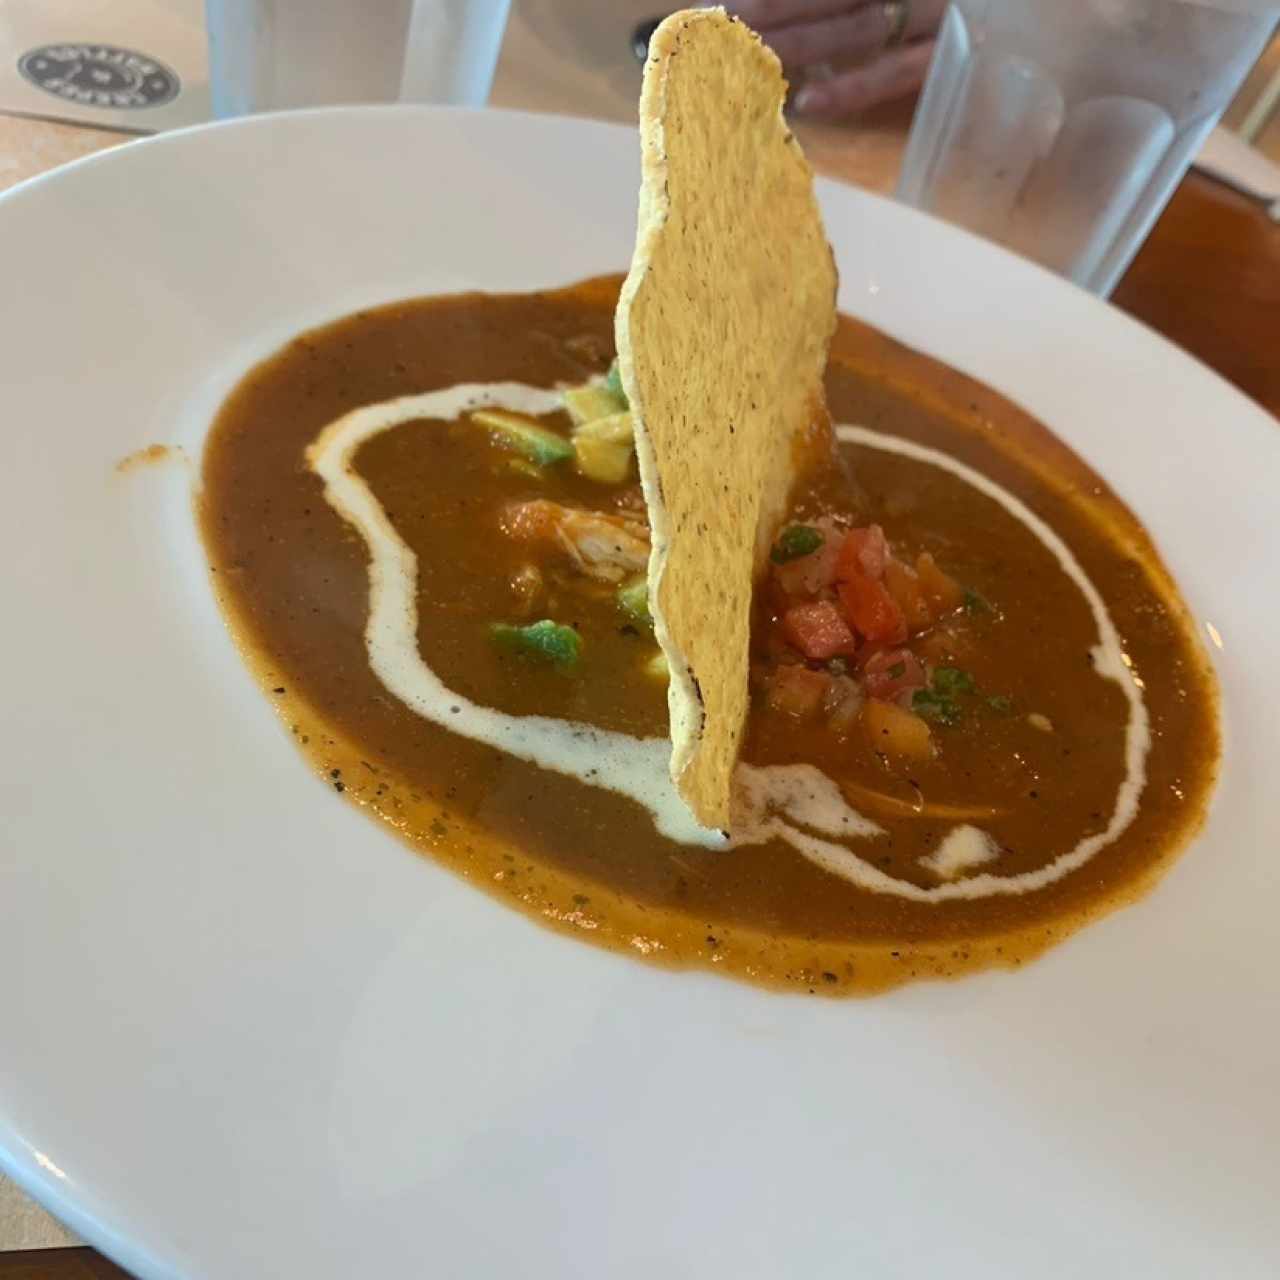 Mexican soup